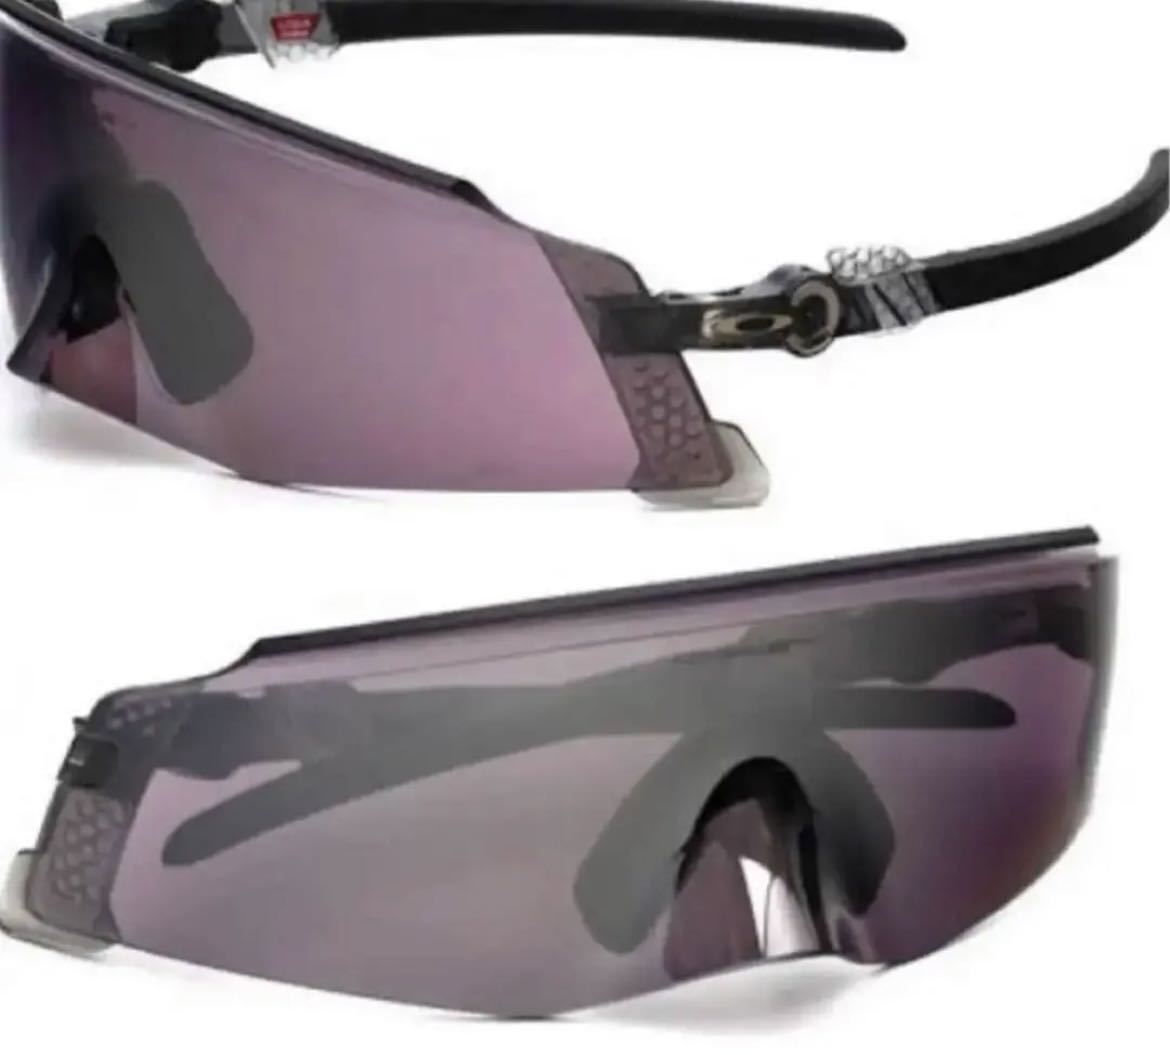 Extremely rare  OAKLEY KATO Oakley Sports Sunglasses OO9455 18 Outdoor Mount